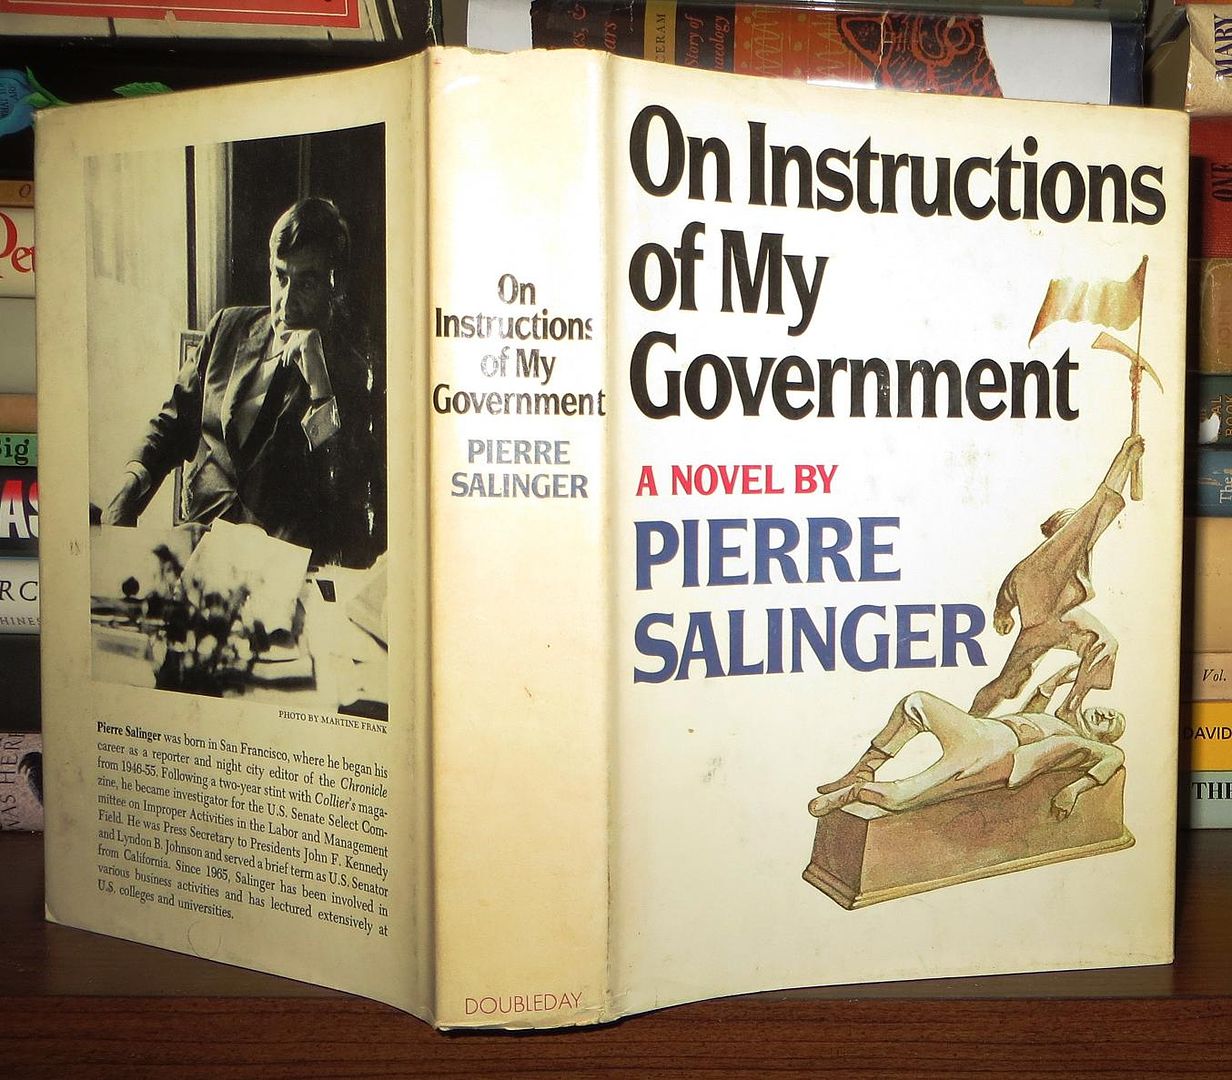 SALINGER, PIERRE - On Instructions of My Government